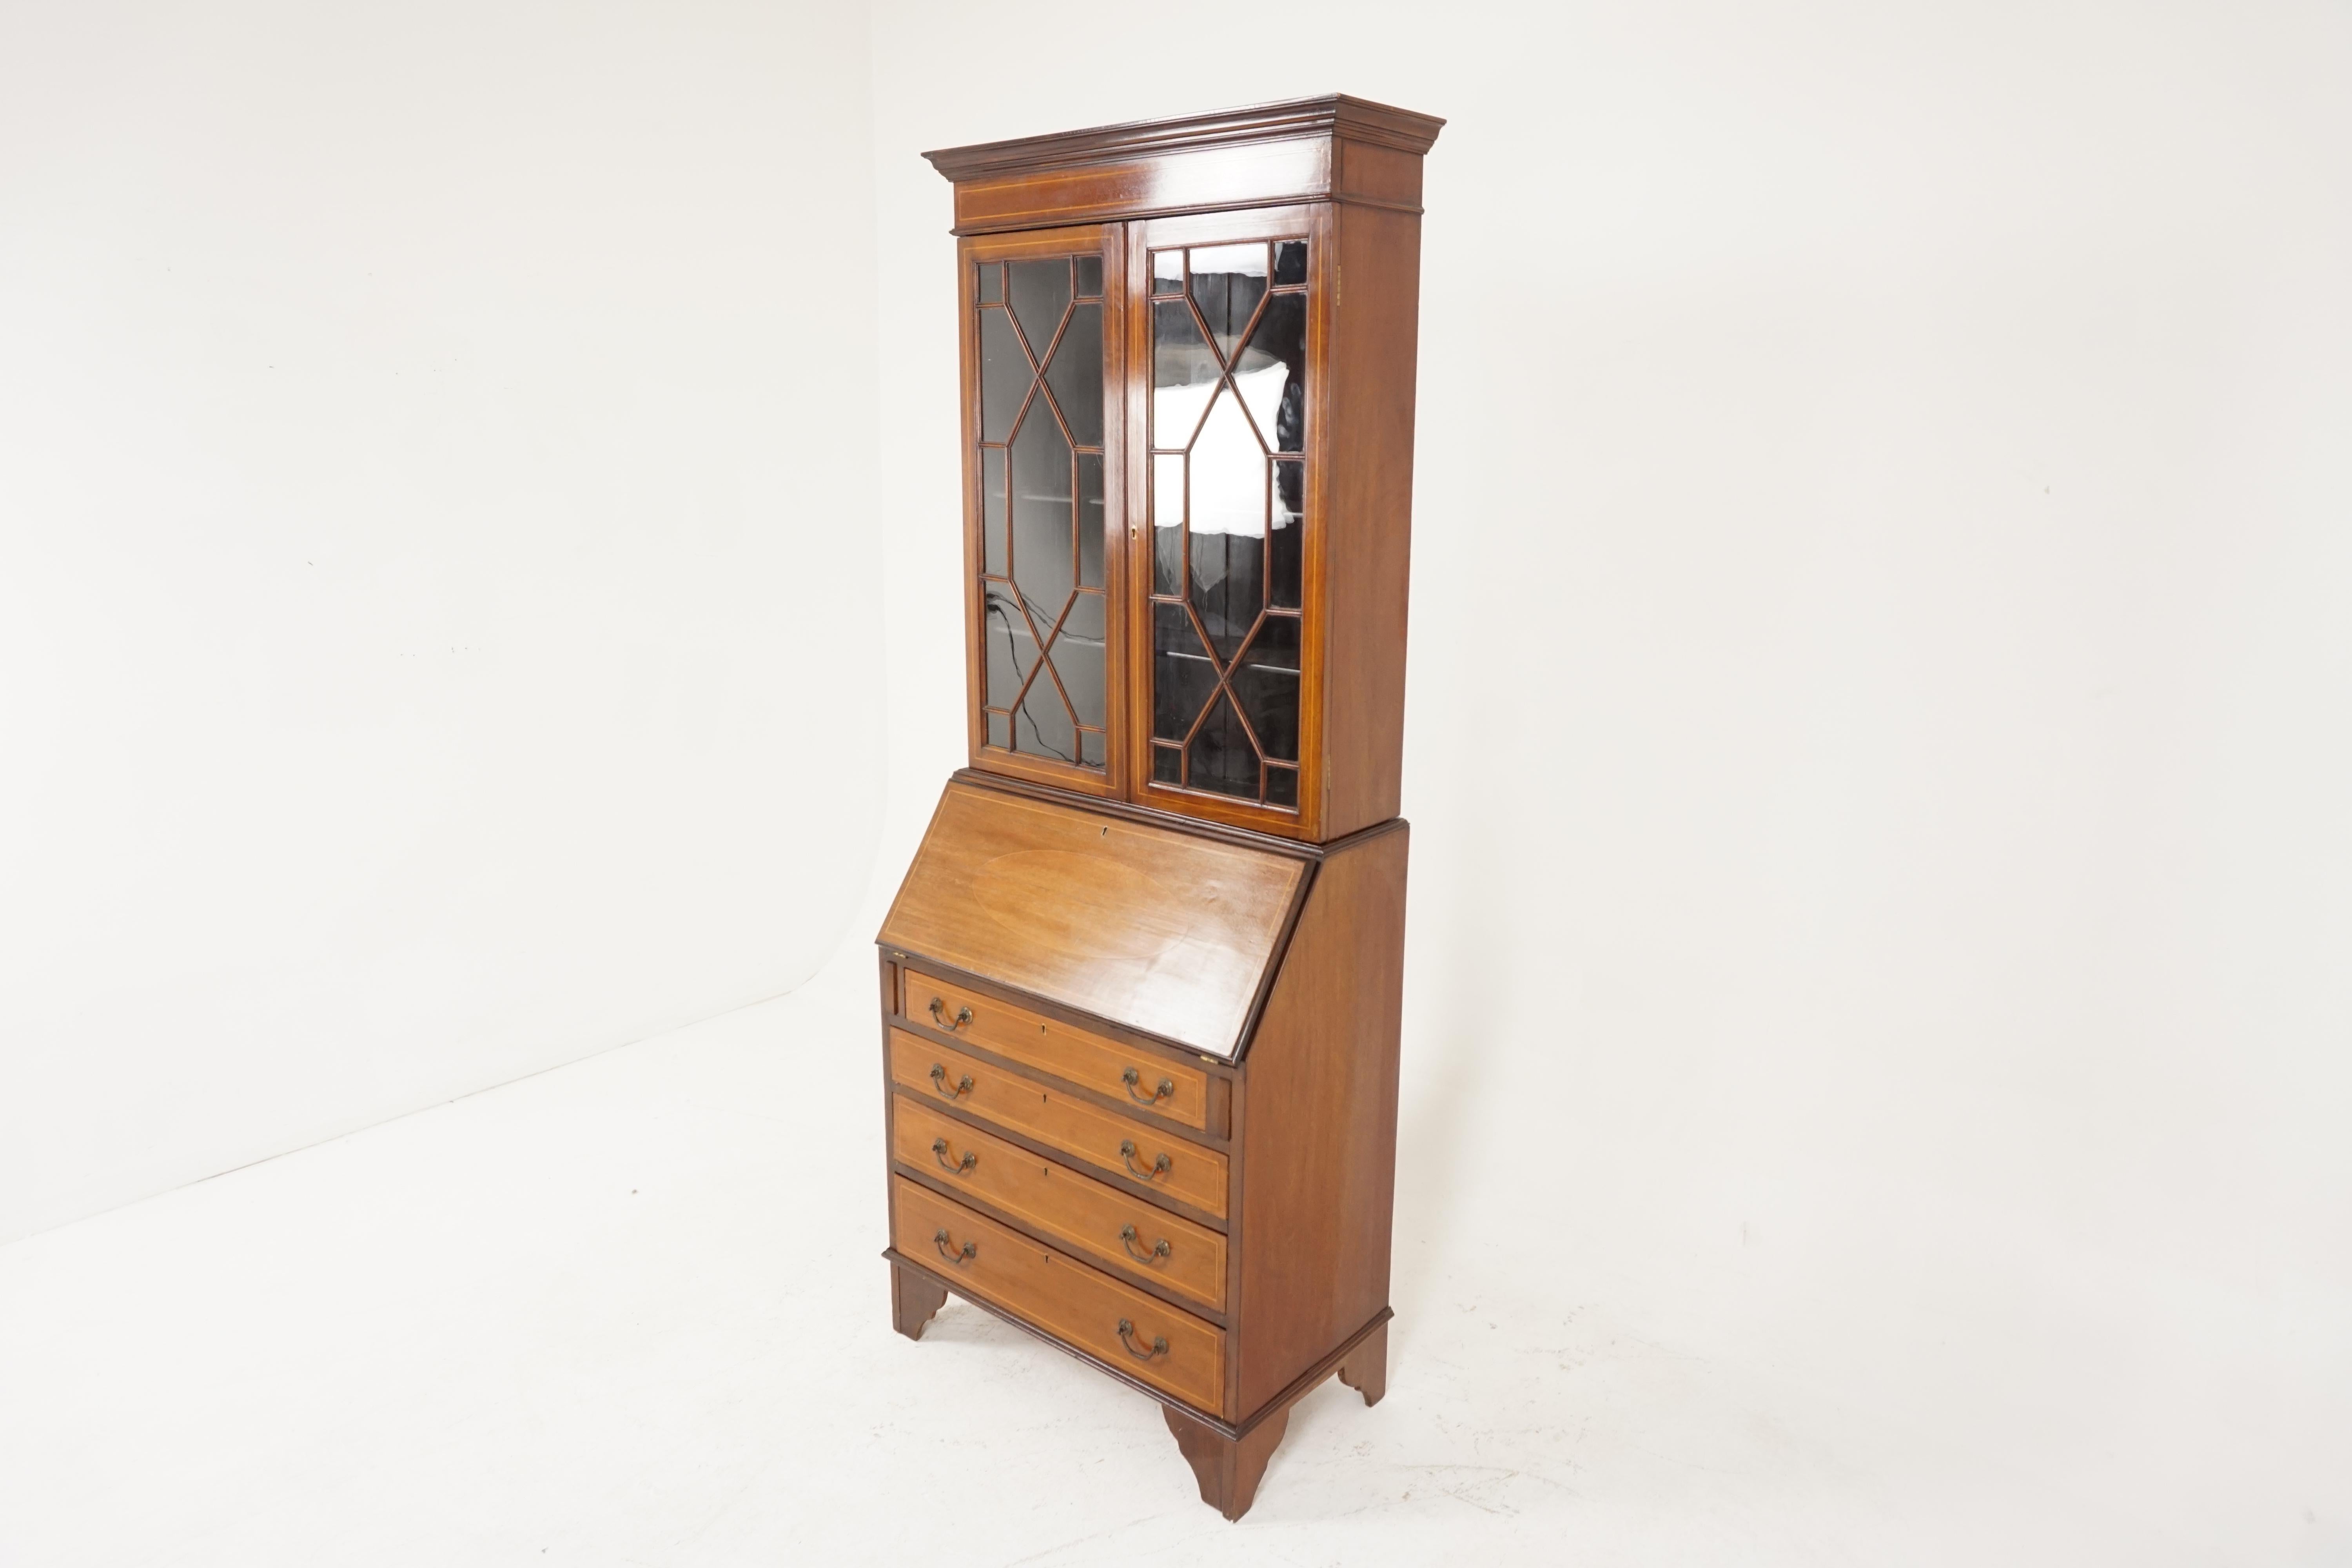 Antique Edwardian Desk, Walnut, Inlaid, Bookcase Top, Scotland 1910, B2384

Scotland, 1910
Solid walnut + veneers
Original finish
Cornice on top with line inlaid decoration
Pair of glass doors when opened
Reveals two adjustable shelves
Below the top